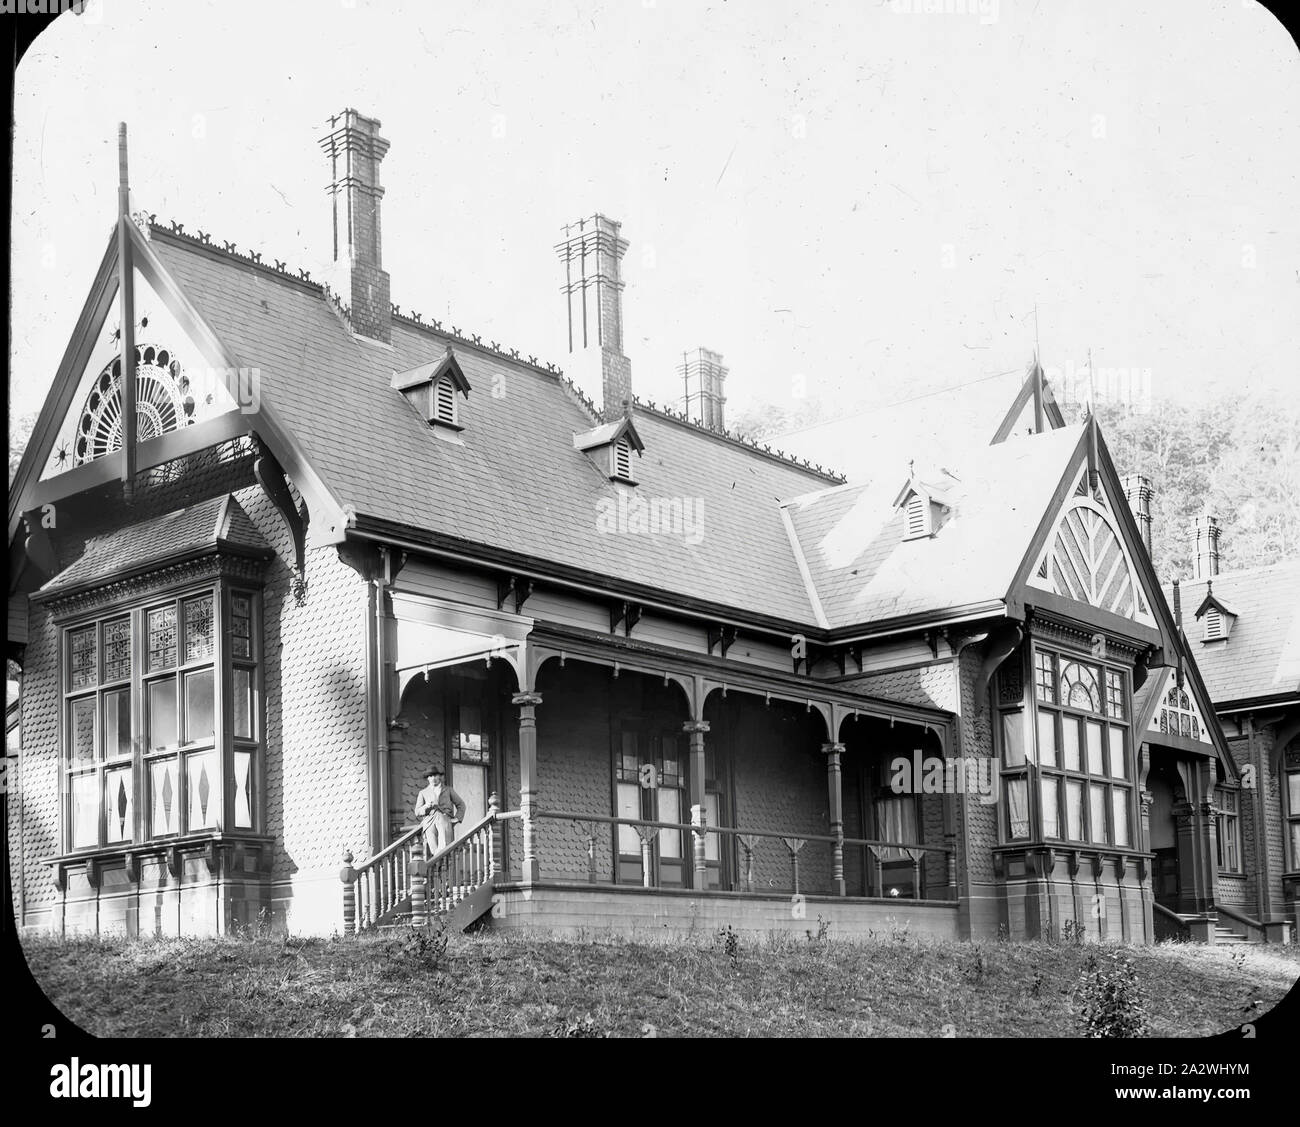 Lantern Slide - Invermay, The Basin, Victoria, circa 1920, Black and white image of the house Invermay built in 1892 by Sir Matthew Davies in The Basin, part of the Dandenongs, using some of the first machine made bricks in the colony and split timber walls transported to the building site on a purpose built railway. Miss Helen Simpson bought the property about the turn of the century when she renamed it Doongalla, added stables and established a fine Stock Photo